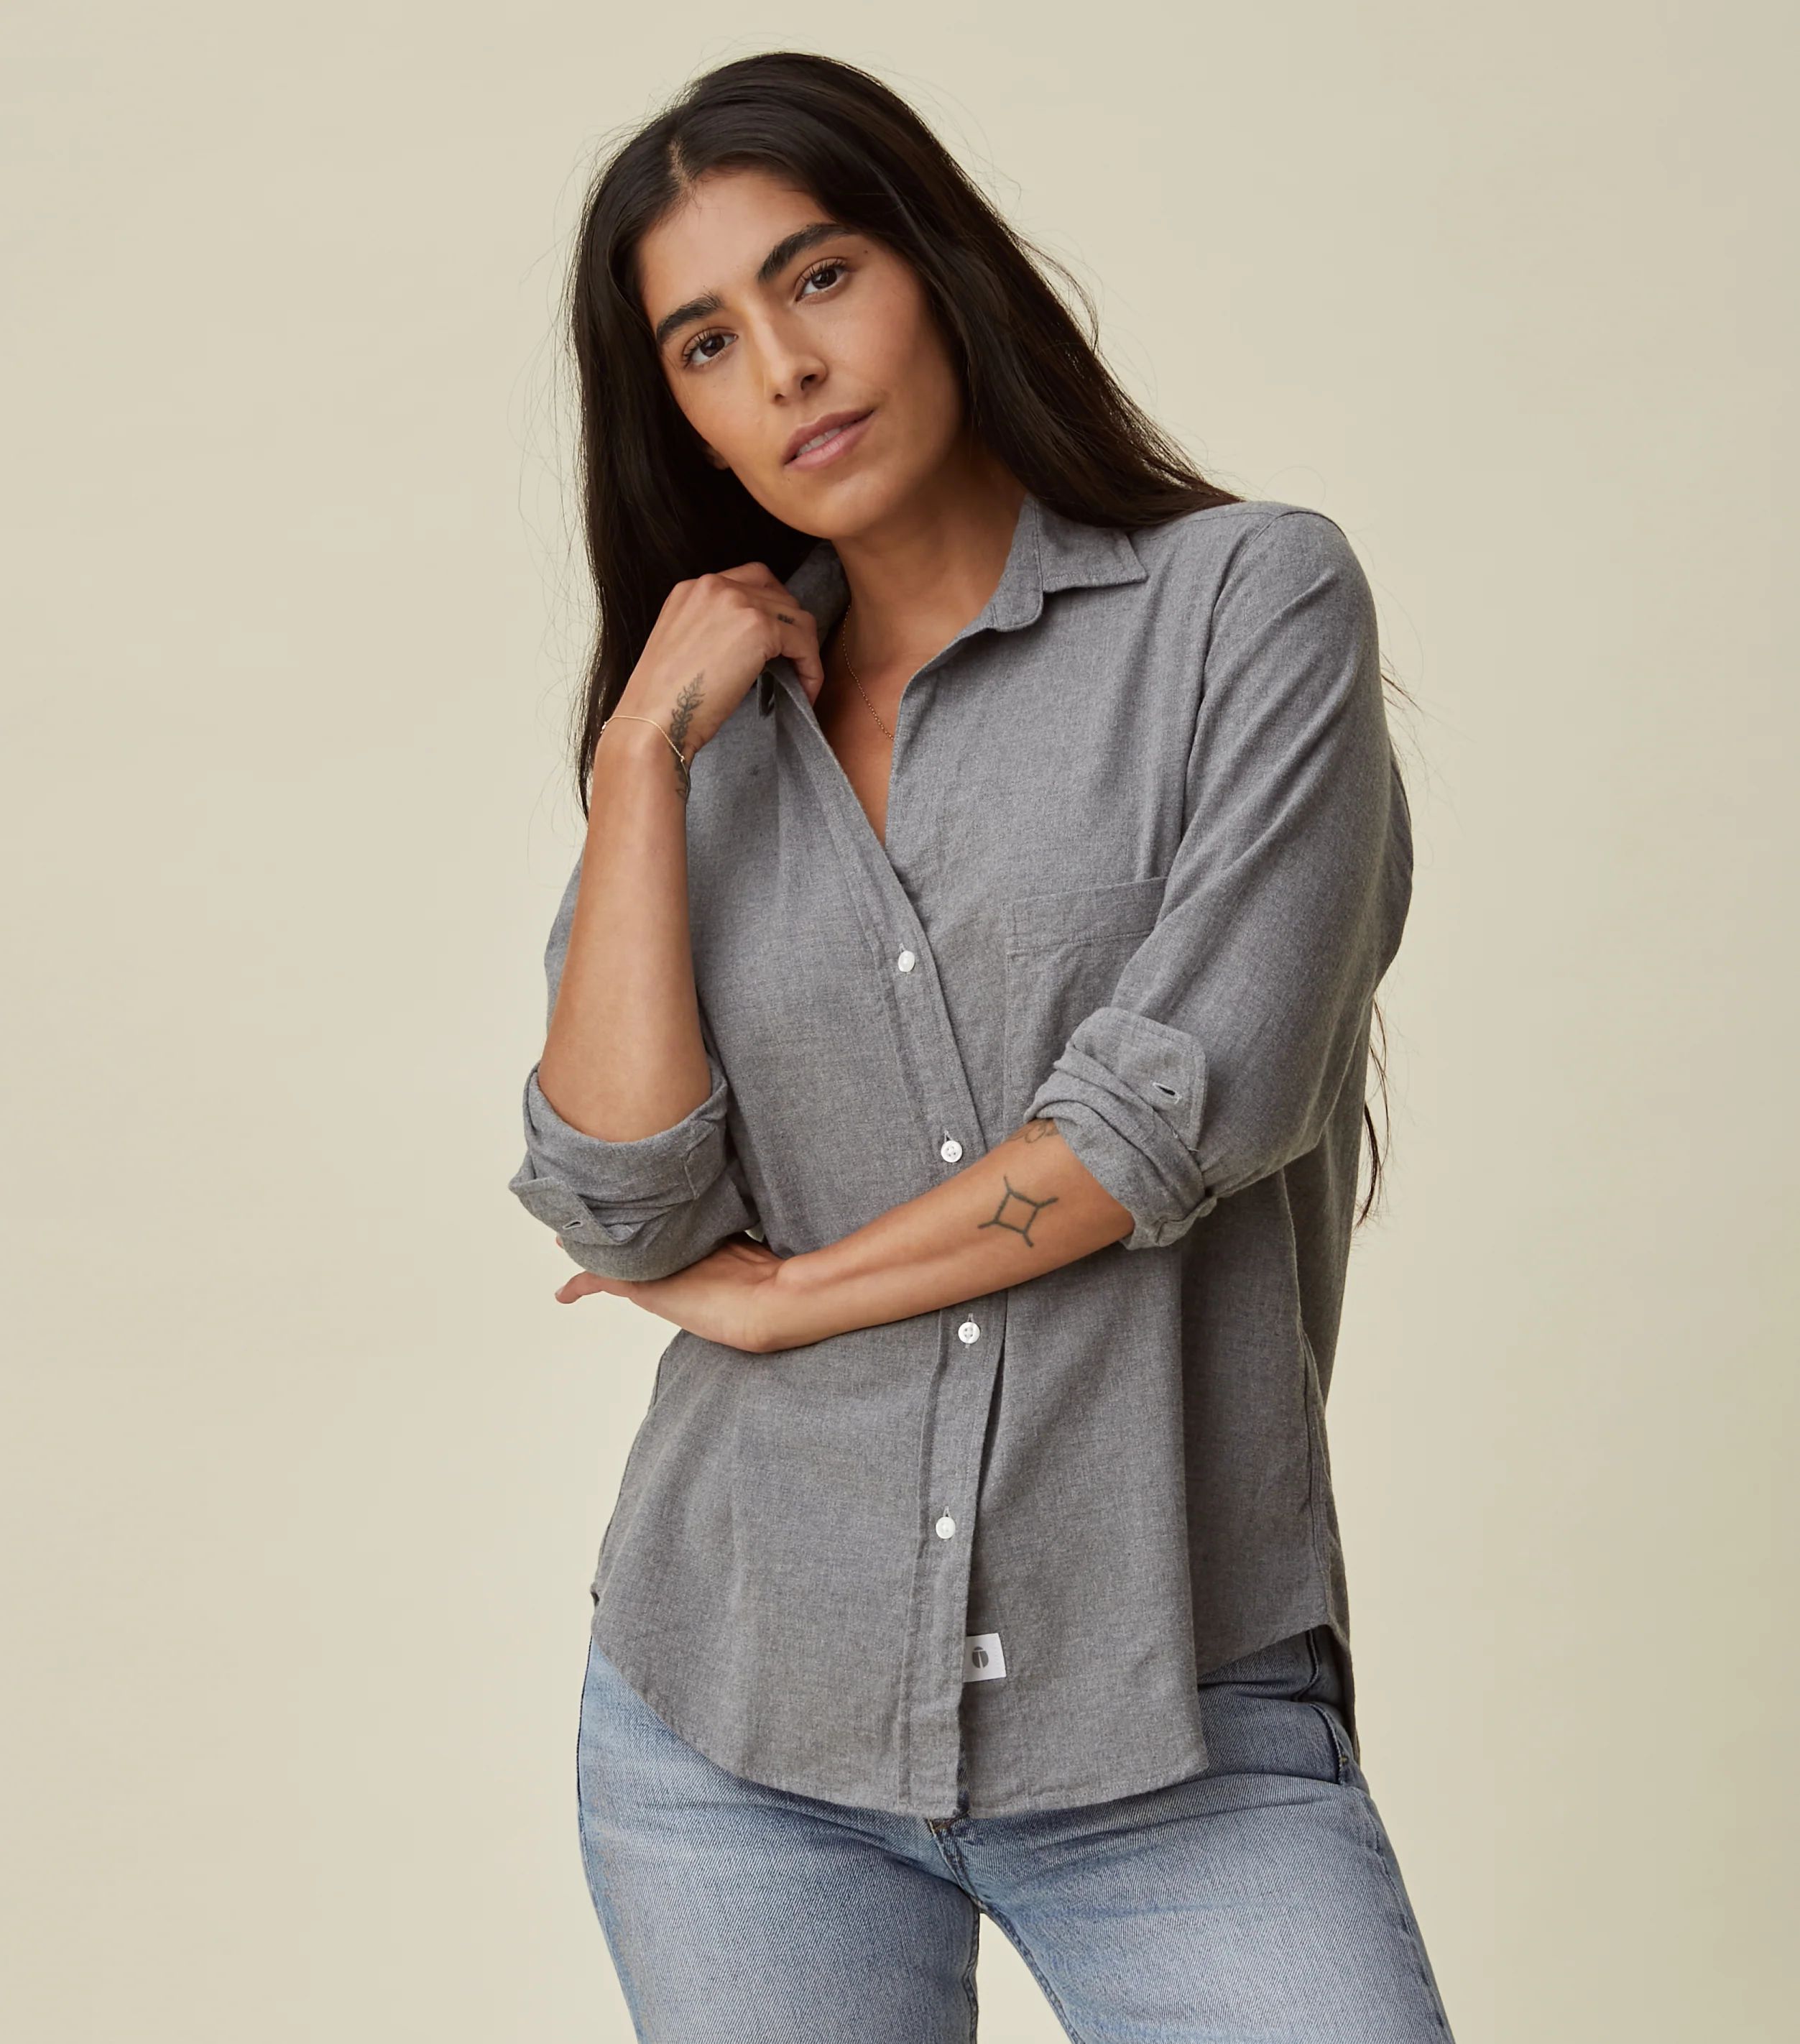 The Hero Button-Up Shirt Gray Melange, Feathered Flannel | Grayson